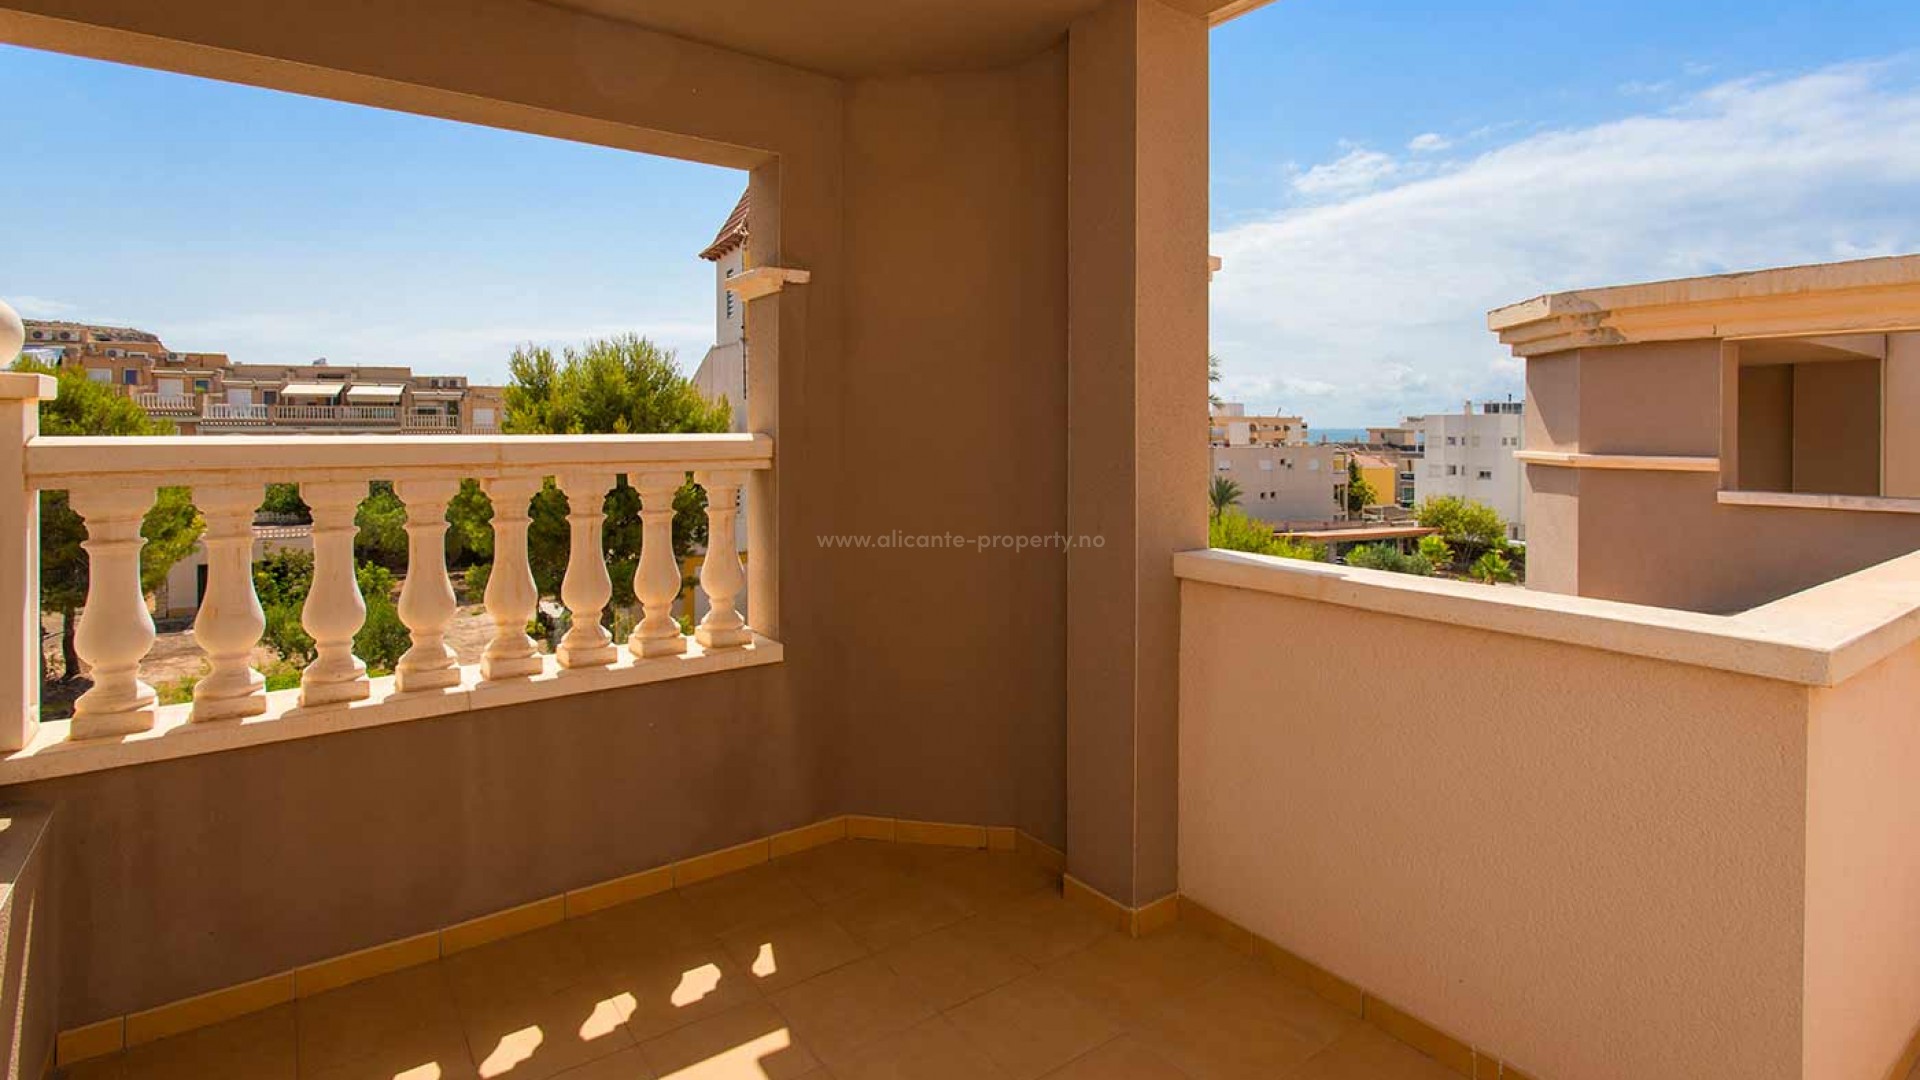 Apartments/flats in Santa Pola, 3 and 2 bedrooms, 2 bathrooms, 150m from the beach, nice view of the bay. Shared pool, card for restaurants, shops, cafes, cinema etc